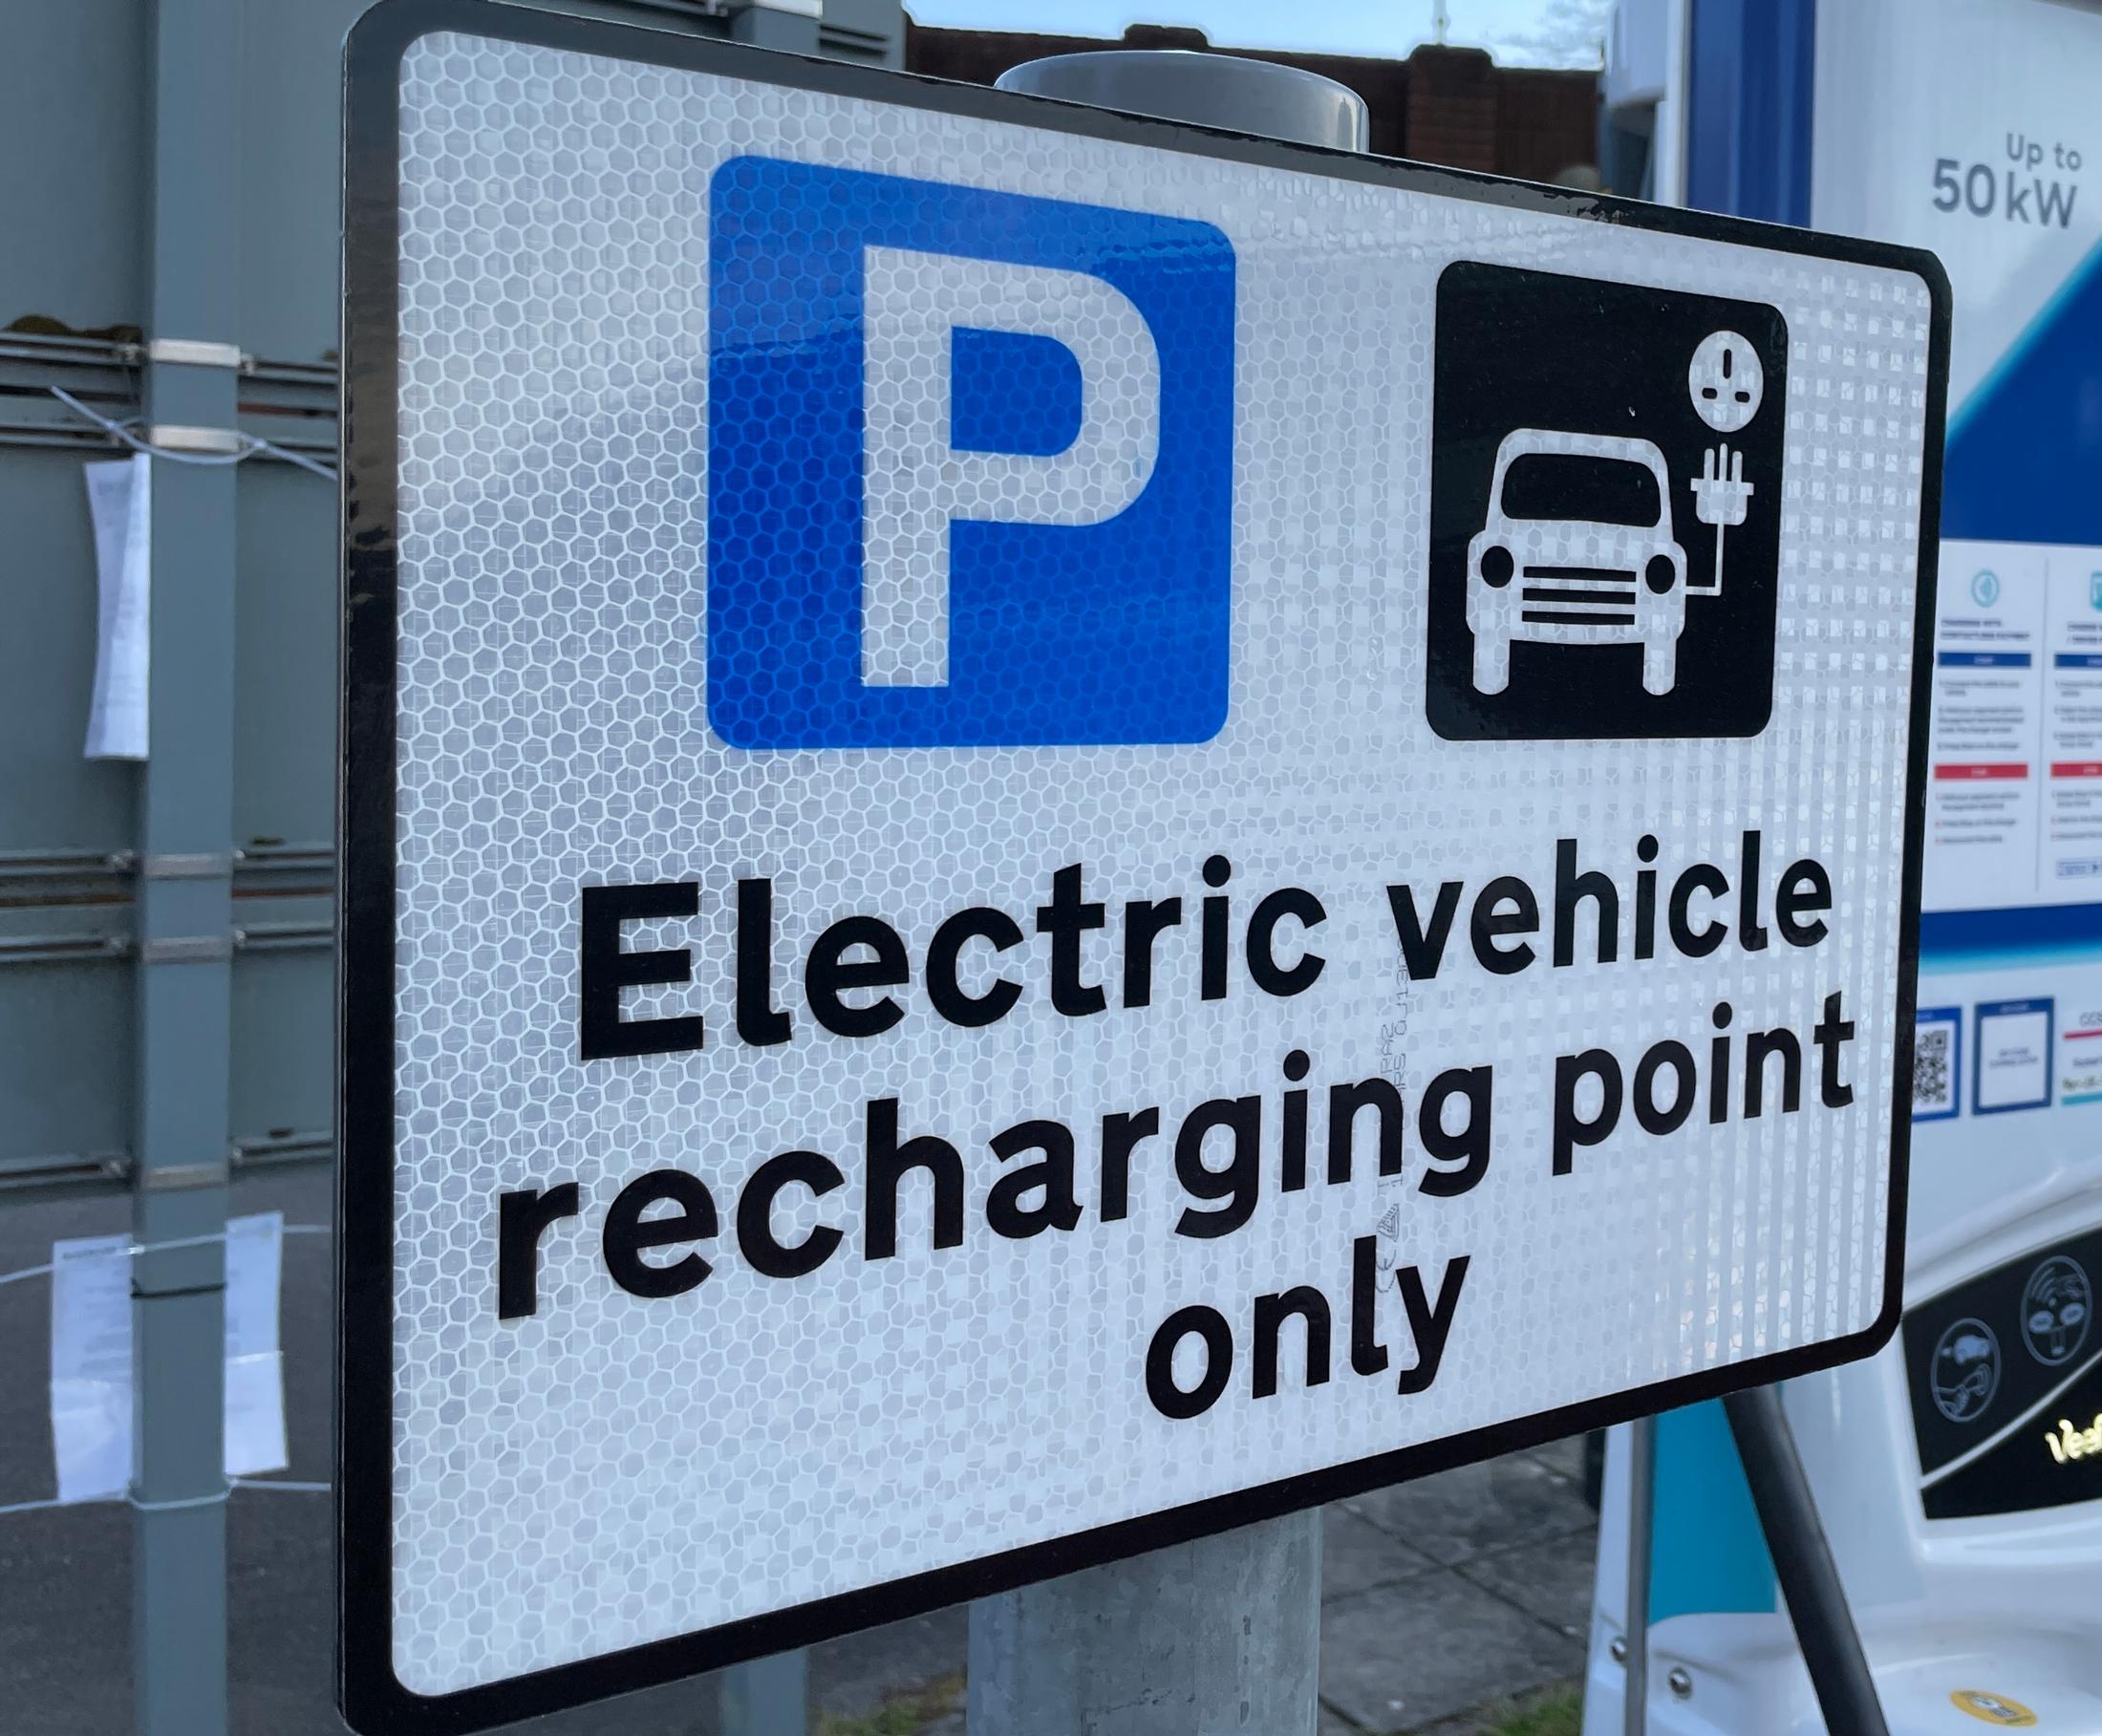 DfT action plan will look at how public EV chargepoints should be aligned with other transport and energy needs